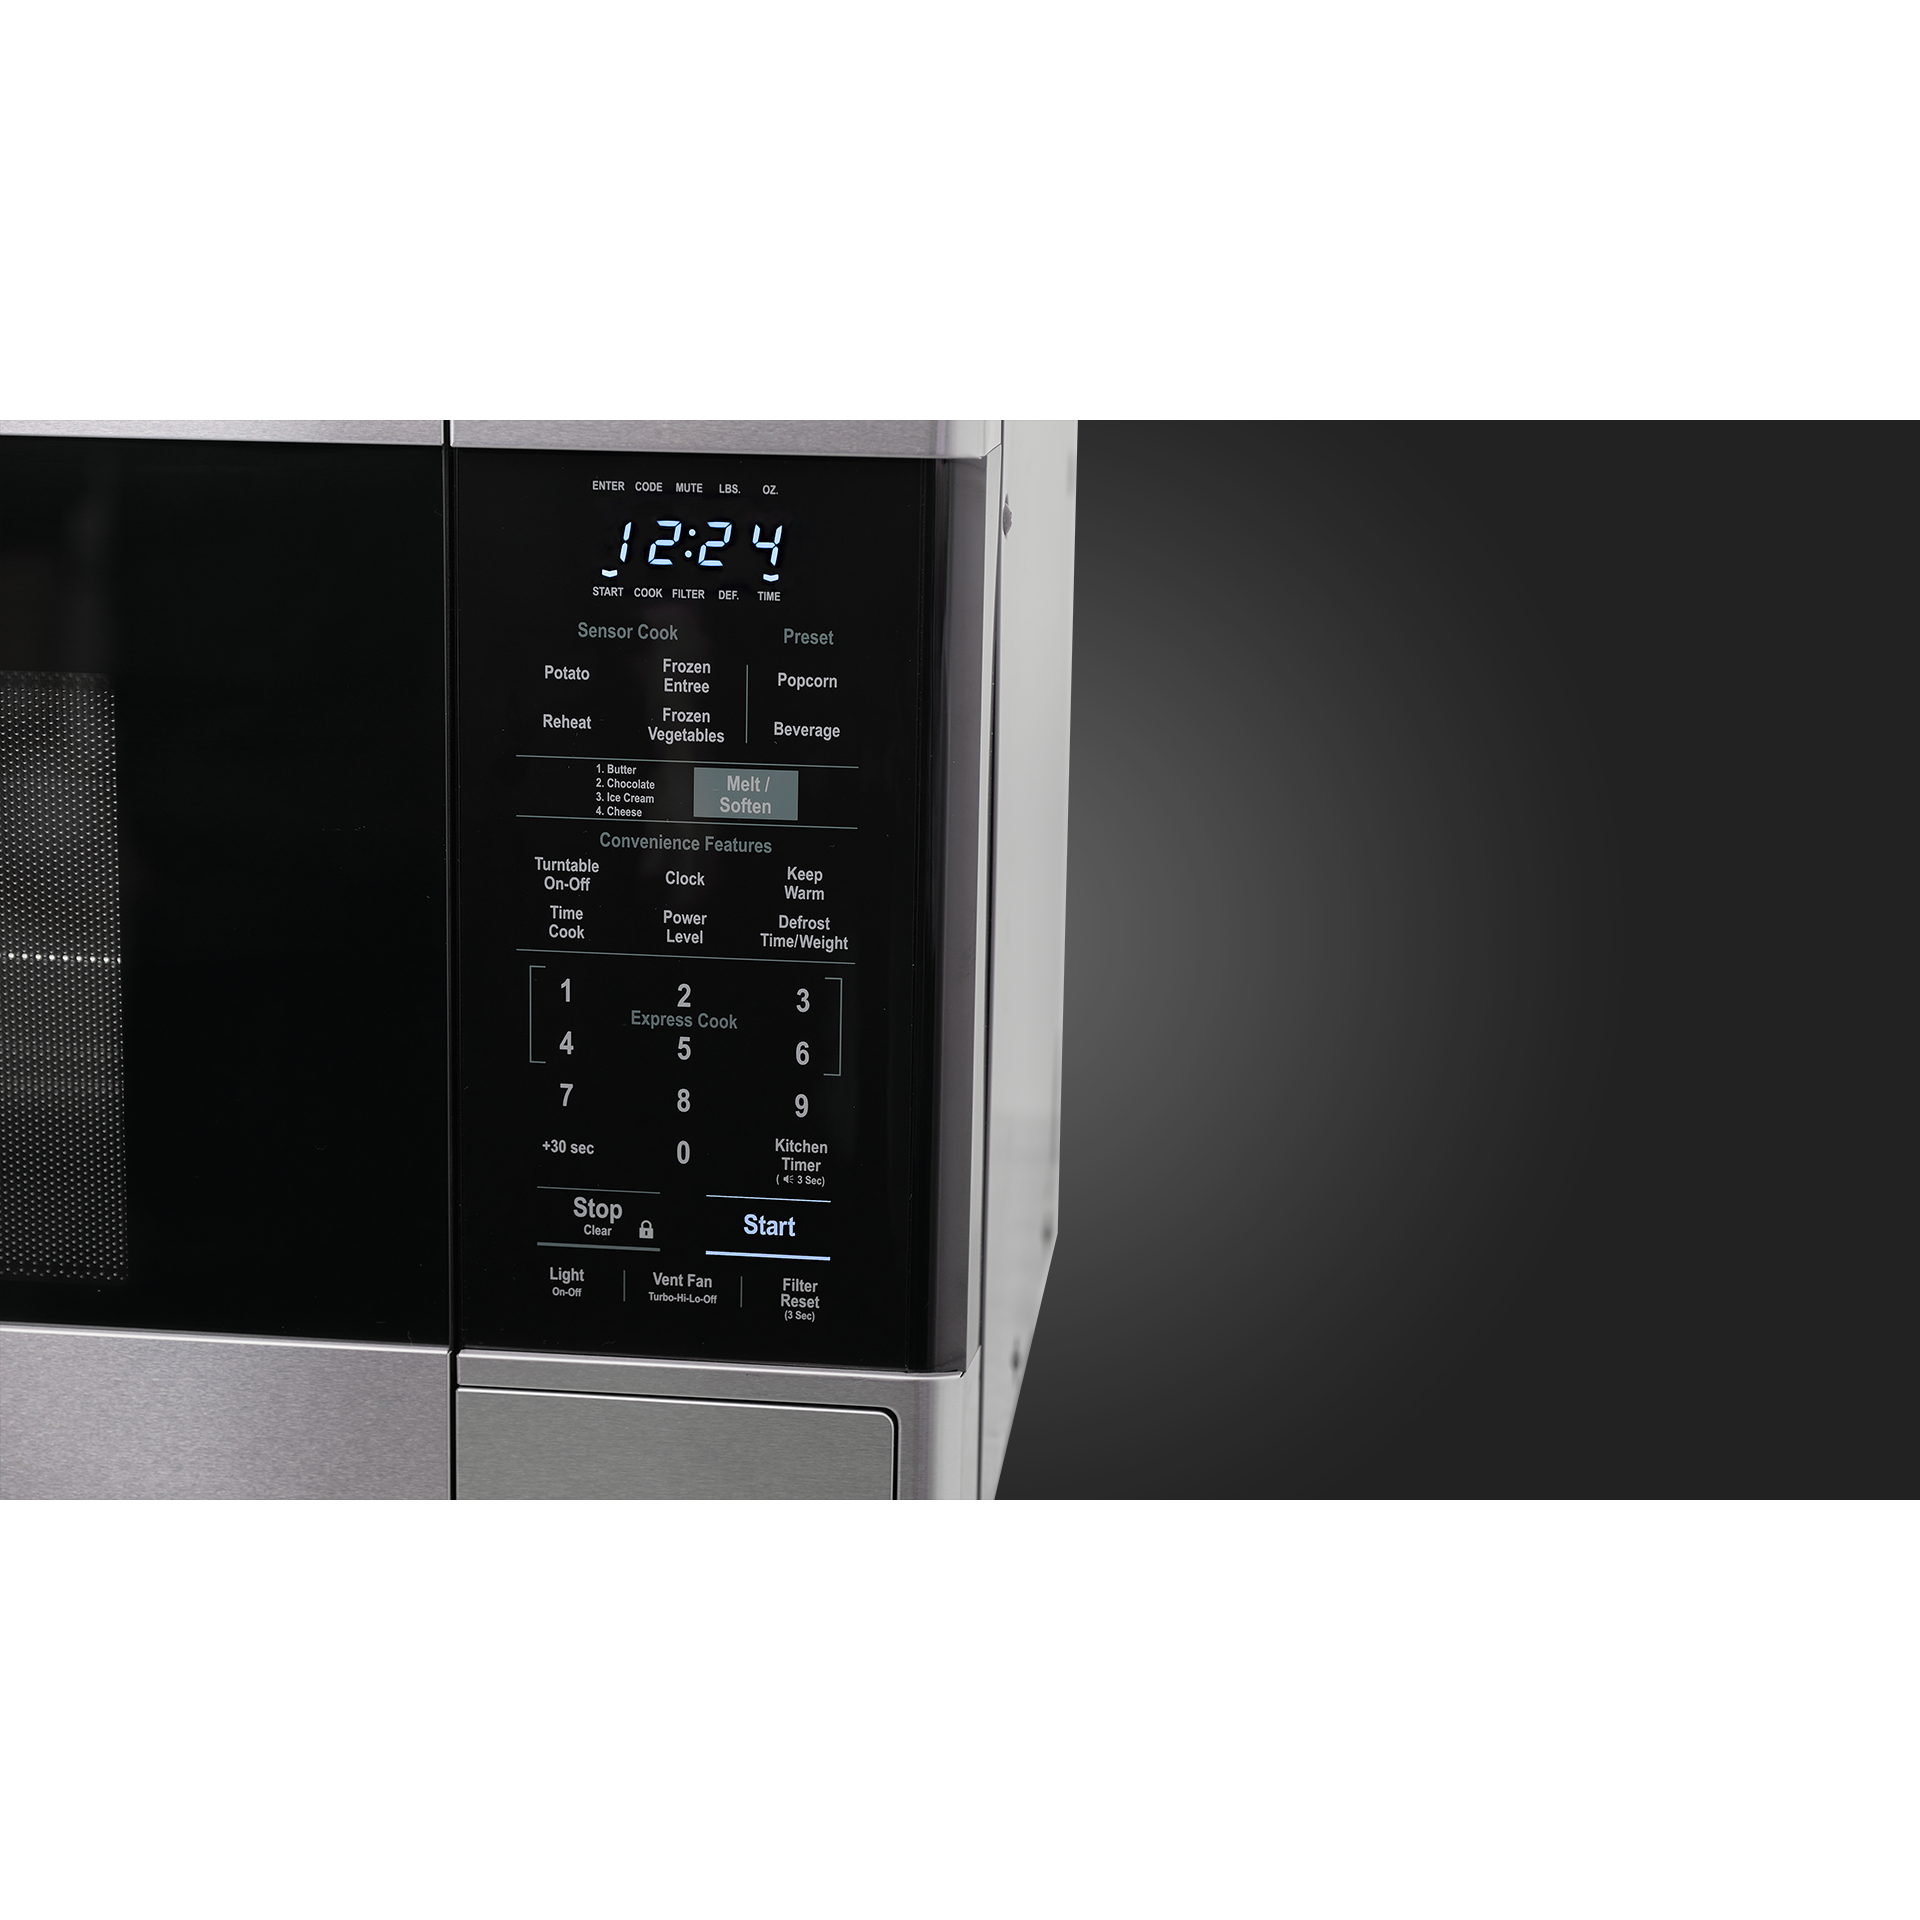 Fulgor Milano 30" Over-the-Range Microwave Oven with 1.8 Cu. Ft. Capacity, Stainless Steel - F4OTR30S1